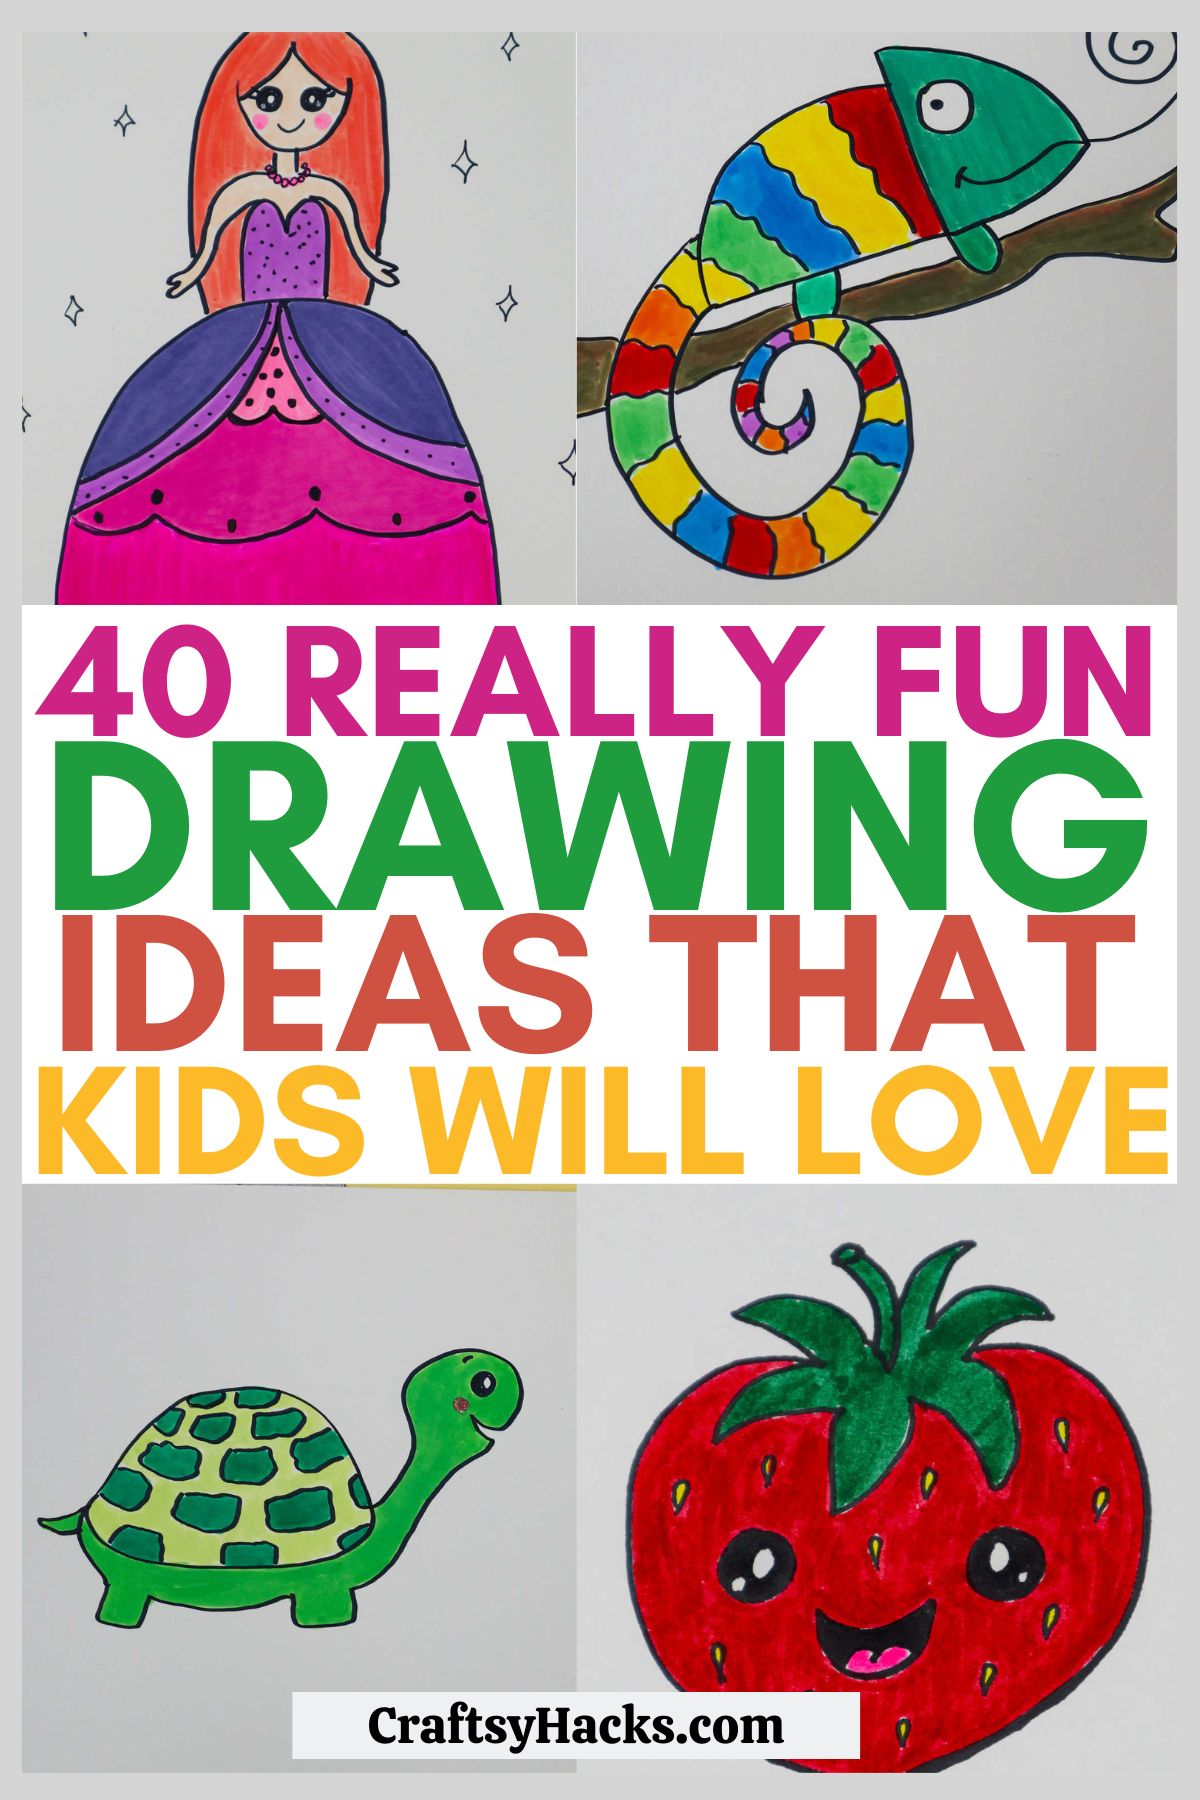 Drawing Ideas For 5-Year-Old Kids - Kids Art & Craft